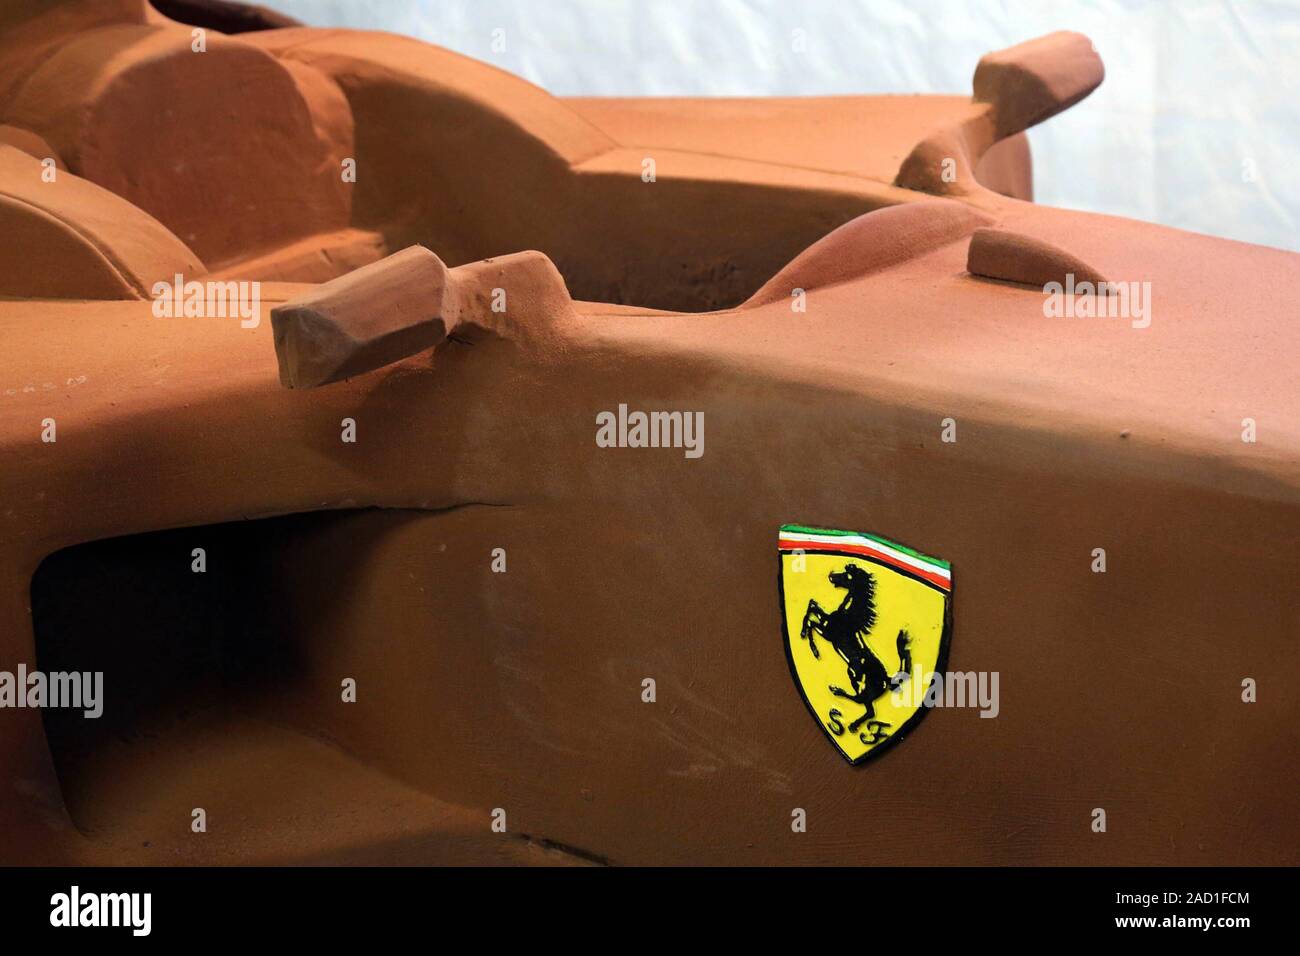 Modena. A reproduction of the Ferrari F2004, the most successful car driven by Michael Schumacher, created by the chocolate master Mirco Della Vecchia to honor the German driver, on display in the Sciocola event Editorial Usage Only Where: Modena When: 02 Nov 2019 Credit: IPA/WENN.com  **Only available for publication in UK, USA, Germany, Austria, Switzerland** Stock Photo